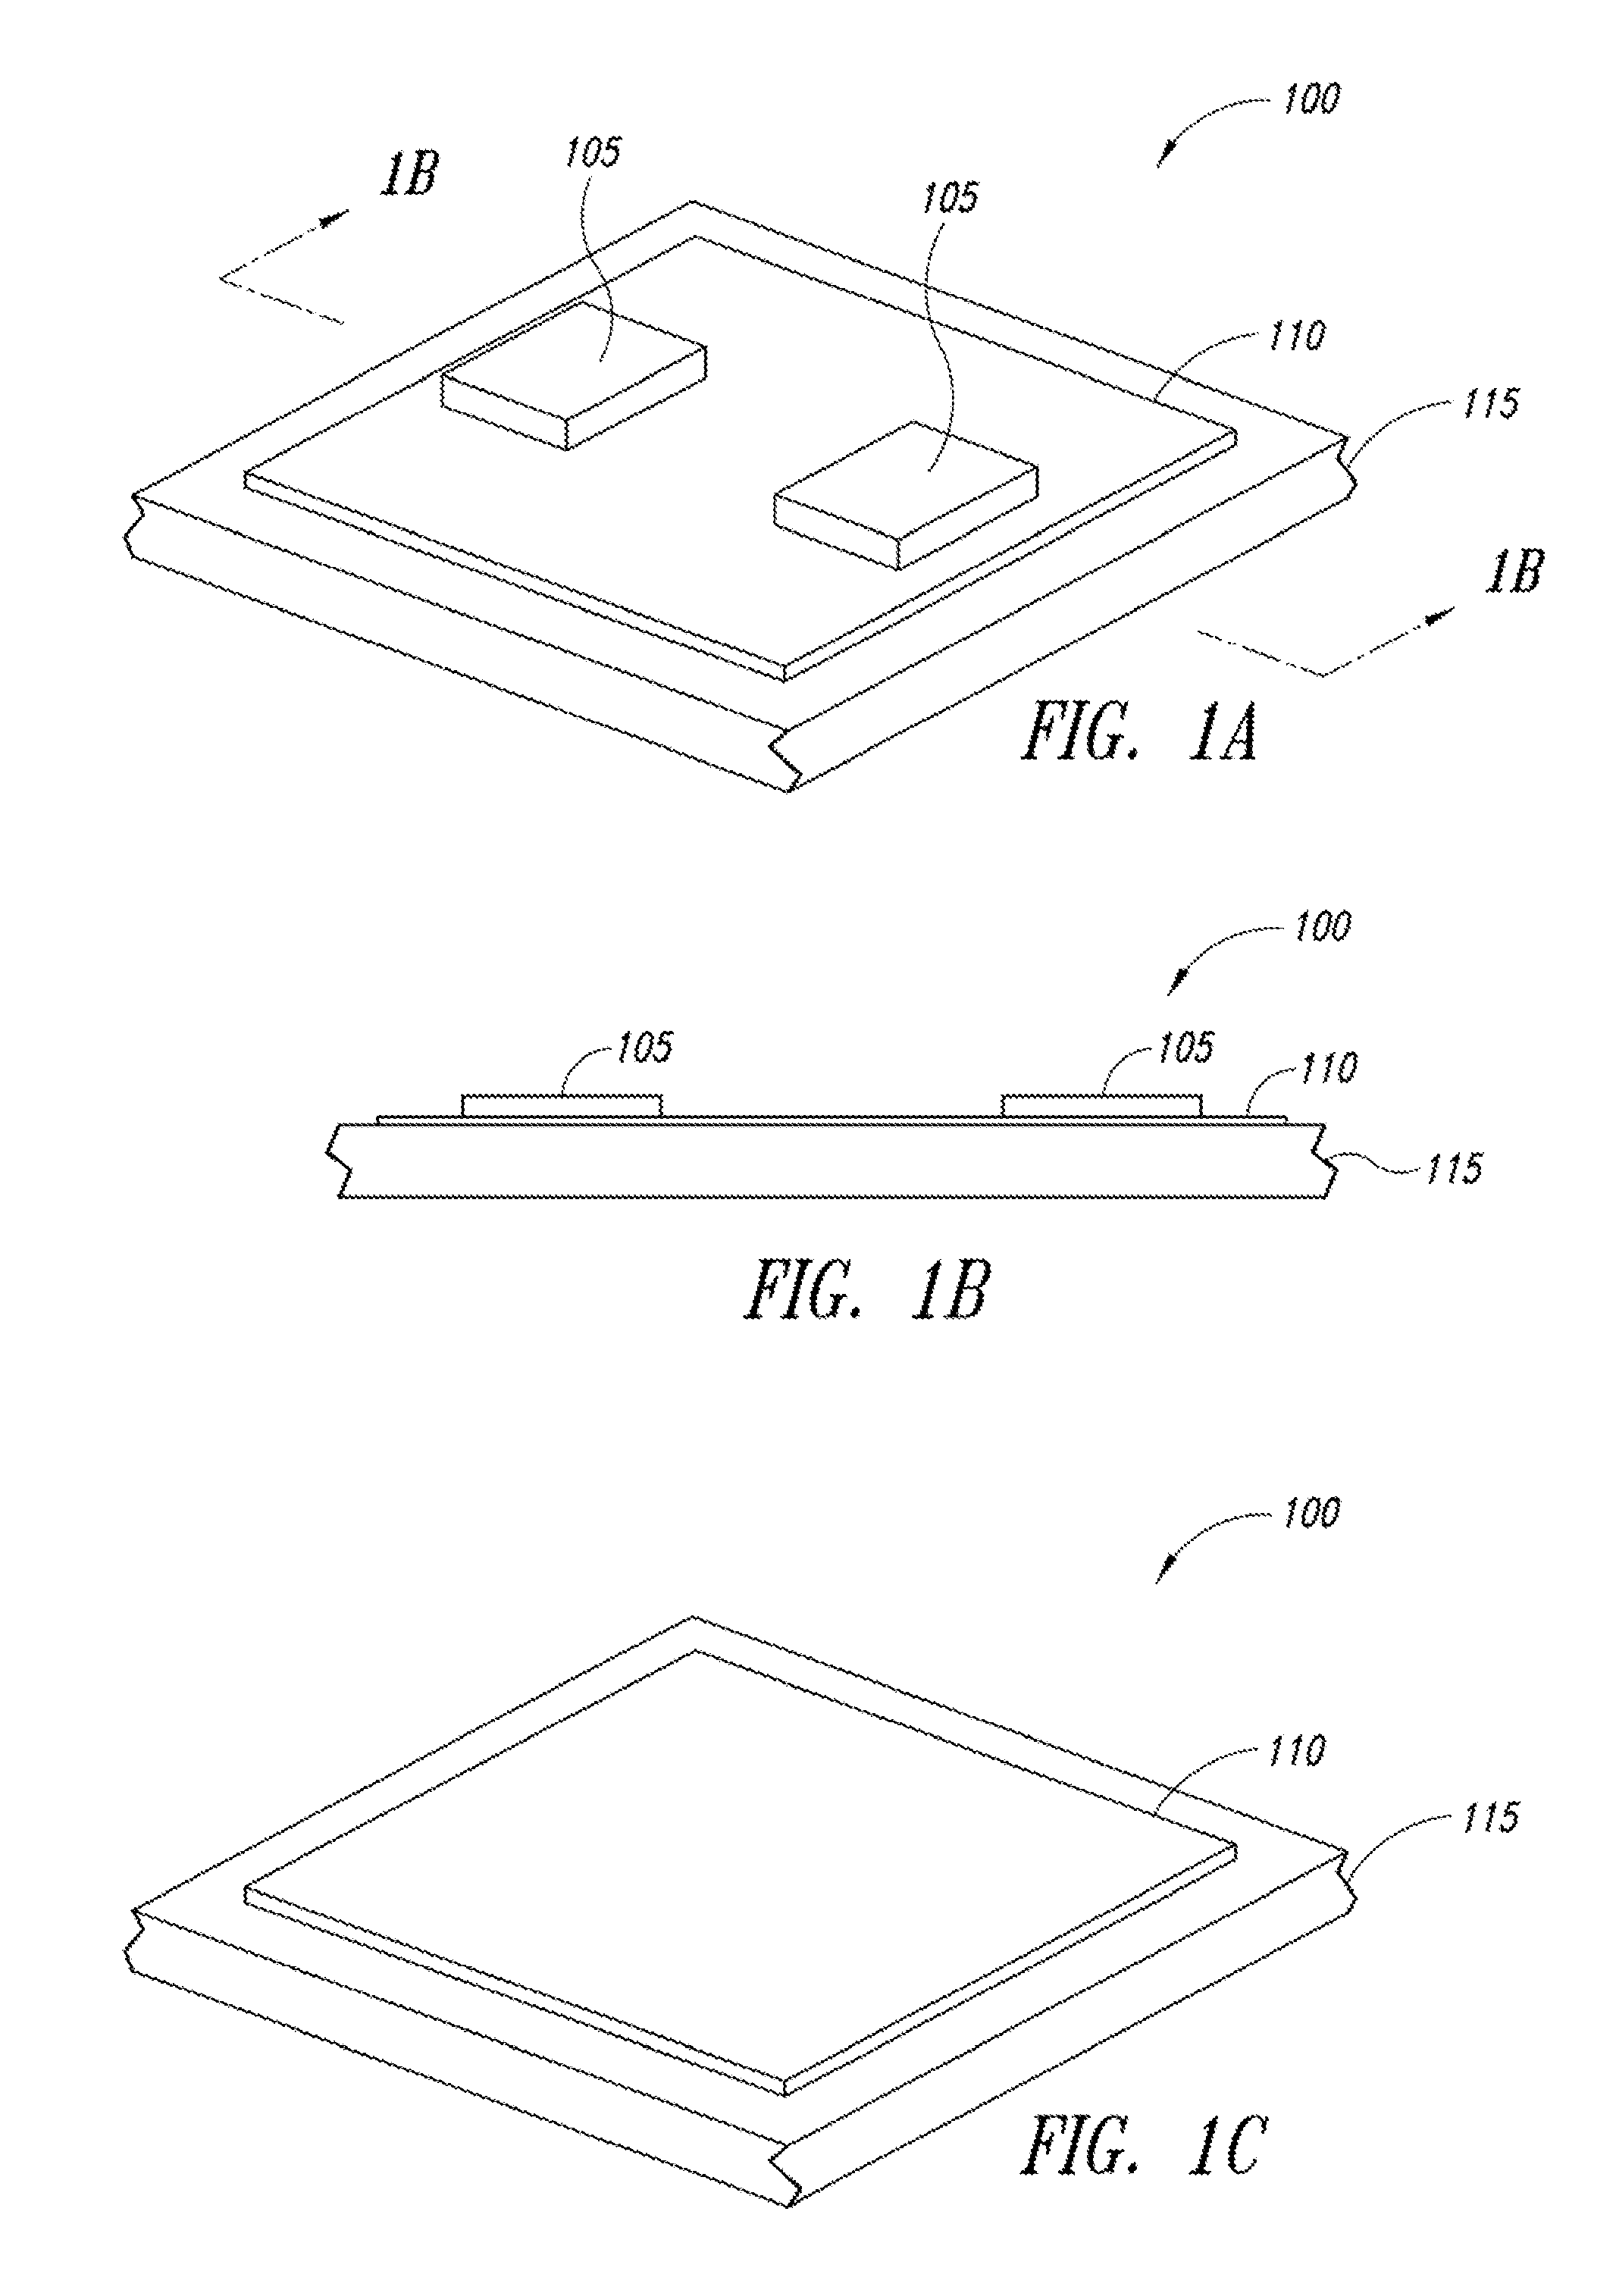 Embedded wafer level ball grid array bar systems and methods